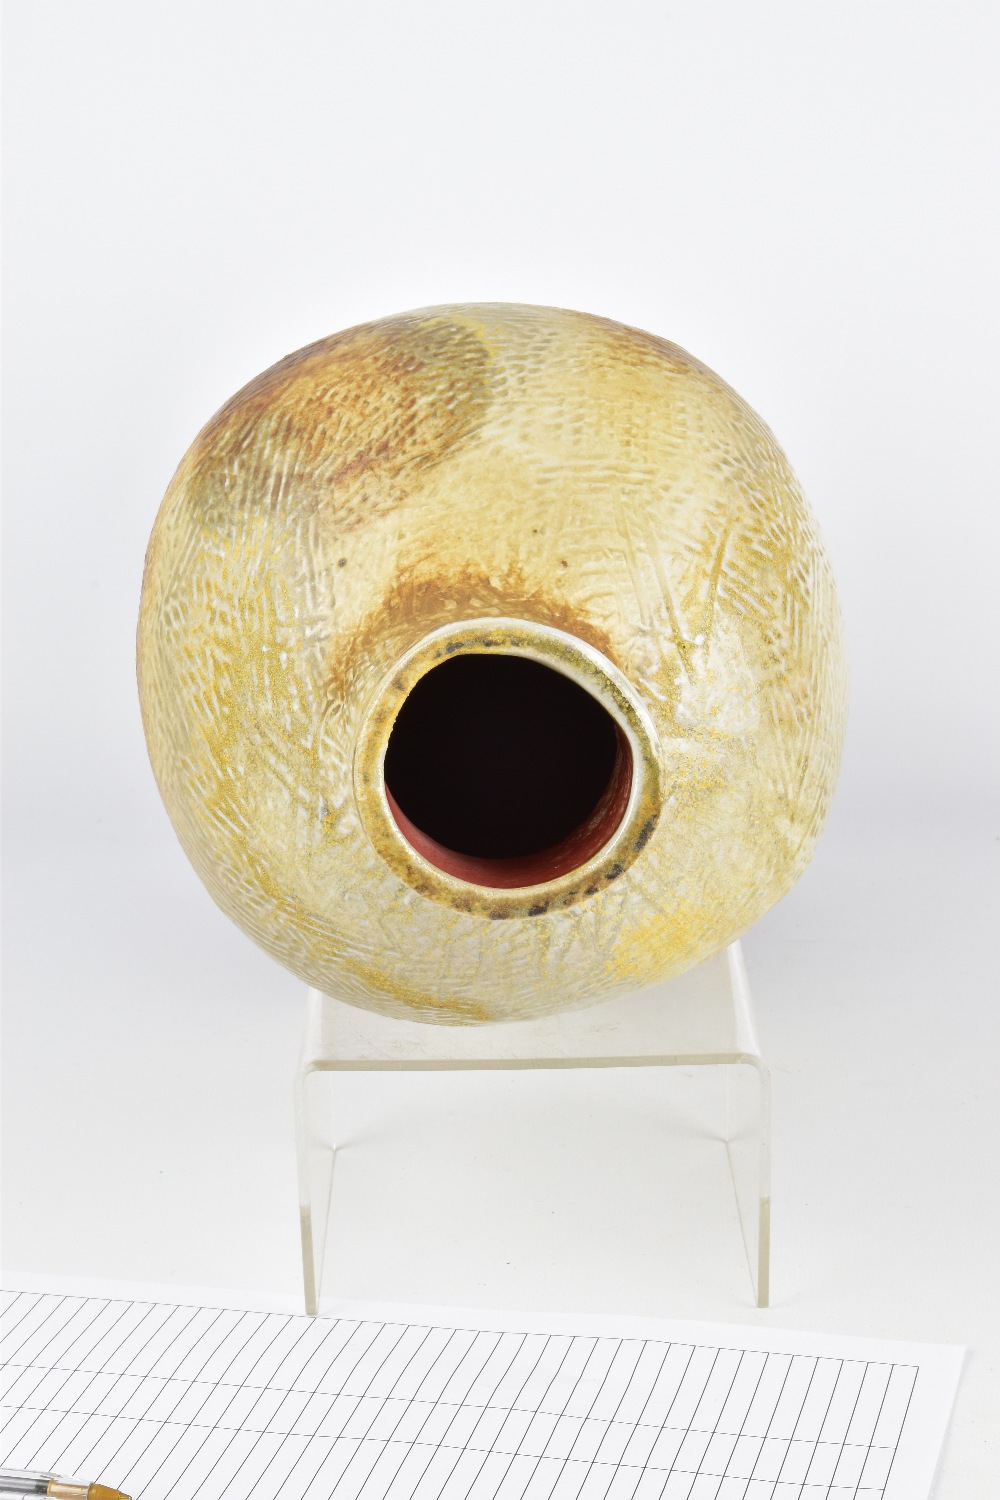 LORI ALLEN; a tall wood fired stoneware bottle, 'Gourd 2', surface pattern with circle decoration, - Image 5 of 6